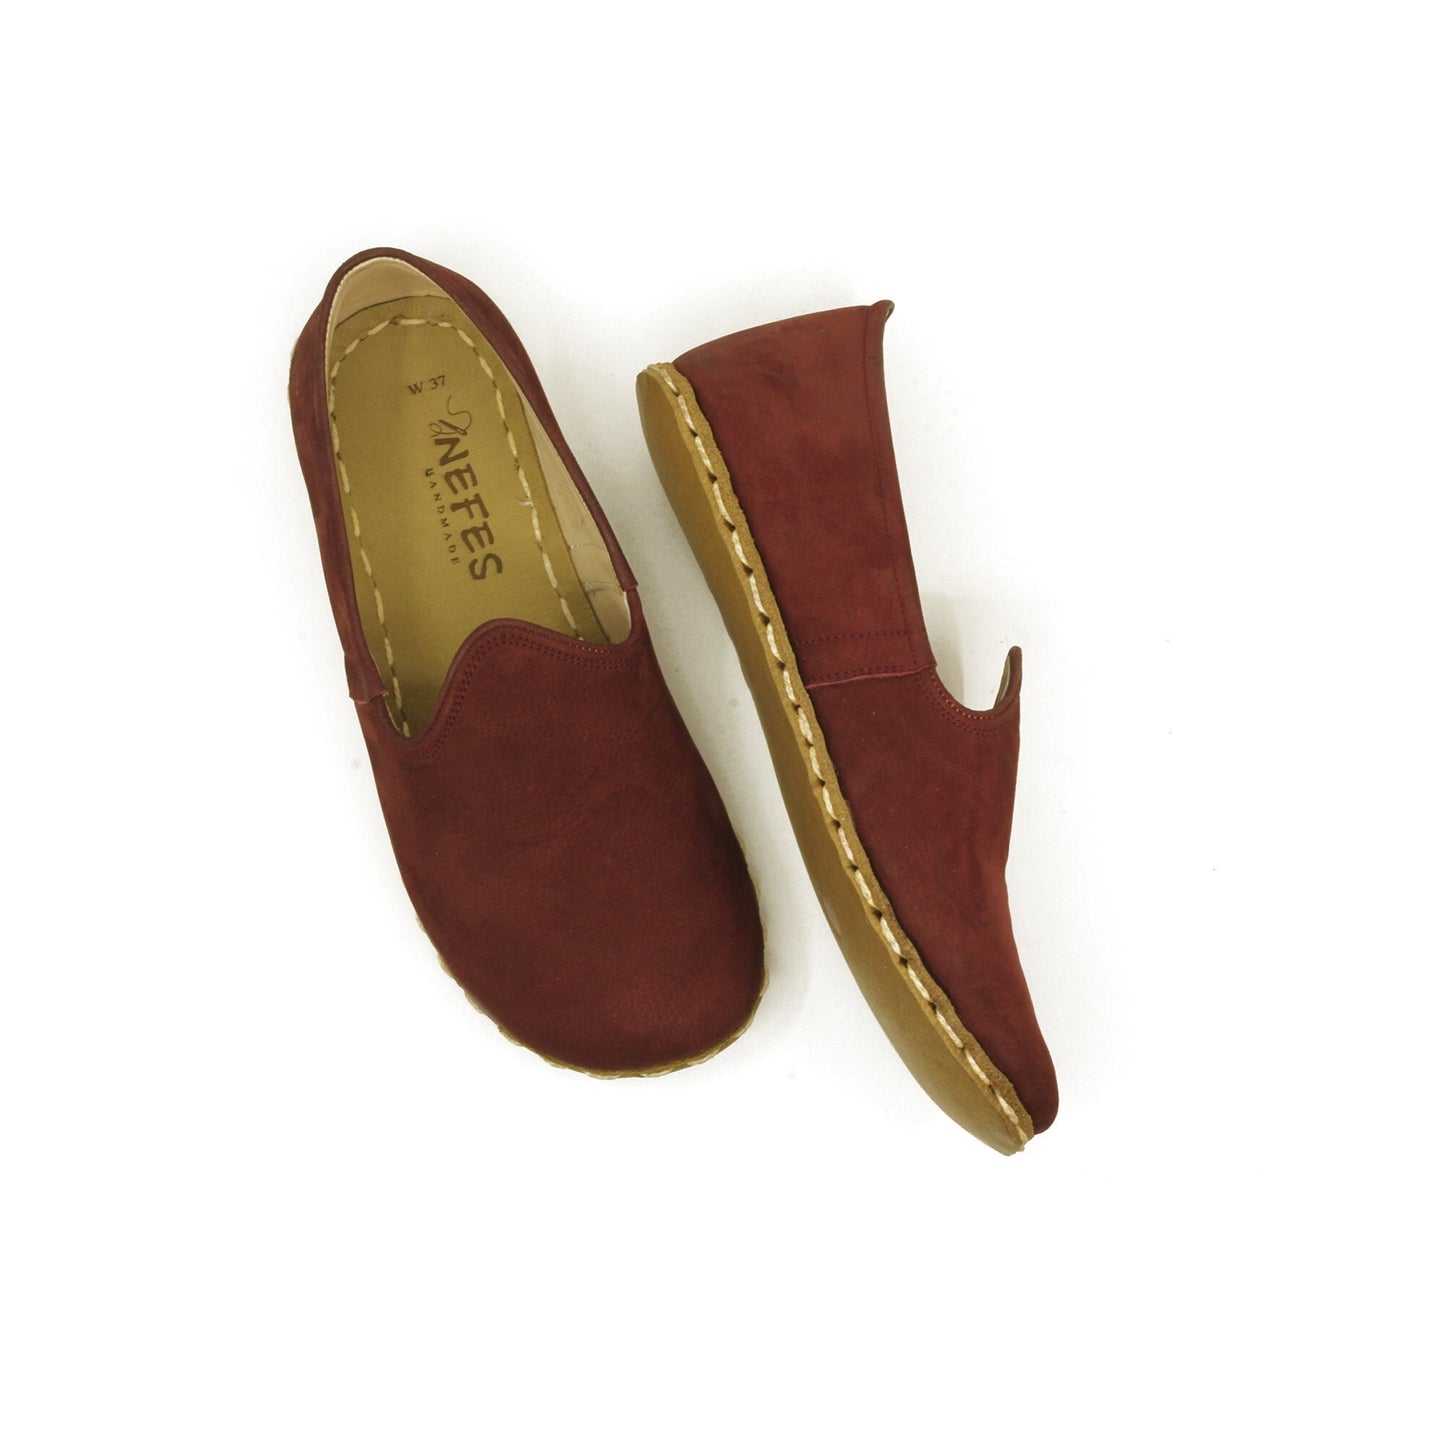 Handmade Turkish Yemeni-Style Burgundy Nubuck Women's Barefoot Shoes - A Unique and Comfortable Addition to Your Wardrobe